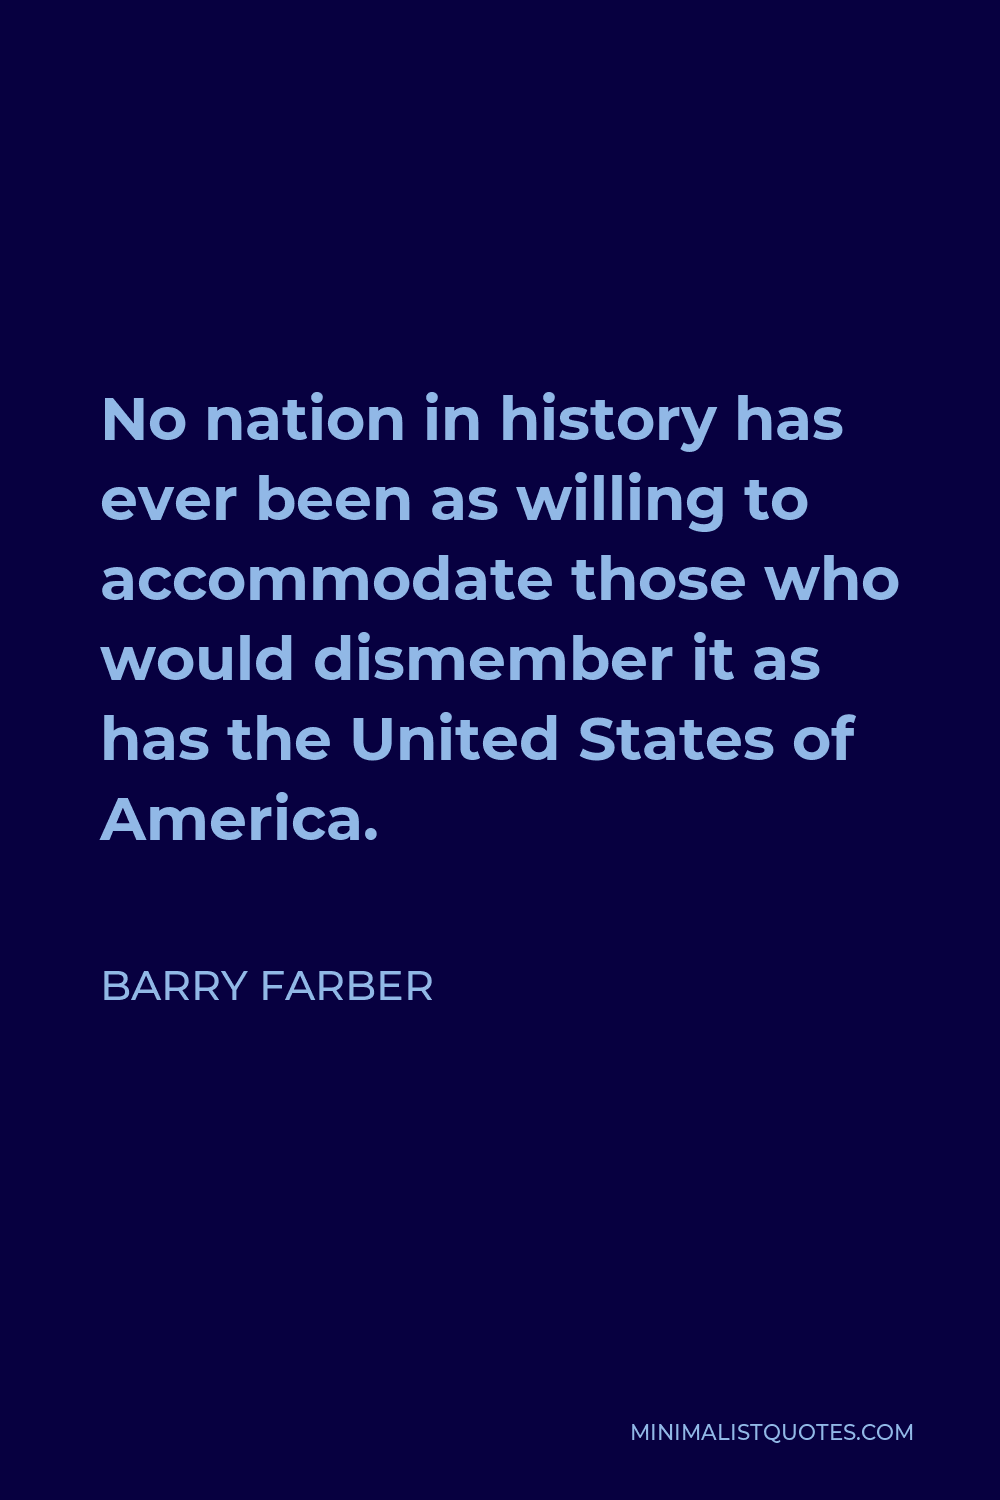 Barry Farber Quote - No nation in history has ever been as willing to accommodate those who would dismember it as has the United States of America.